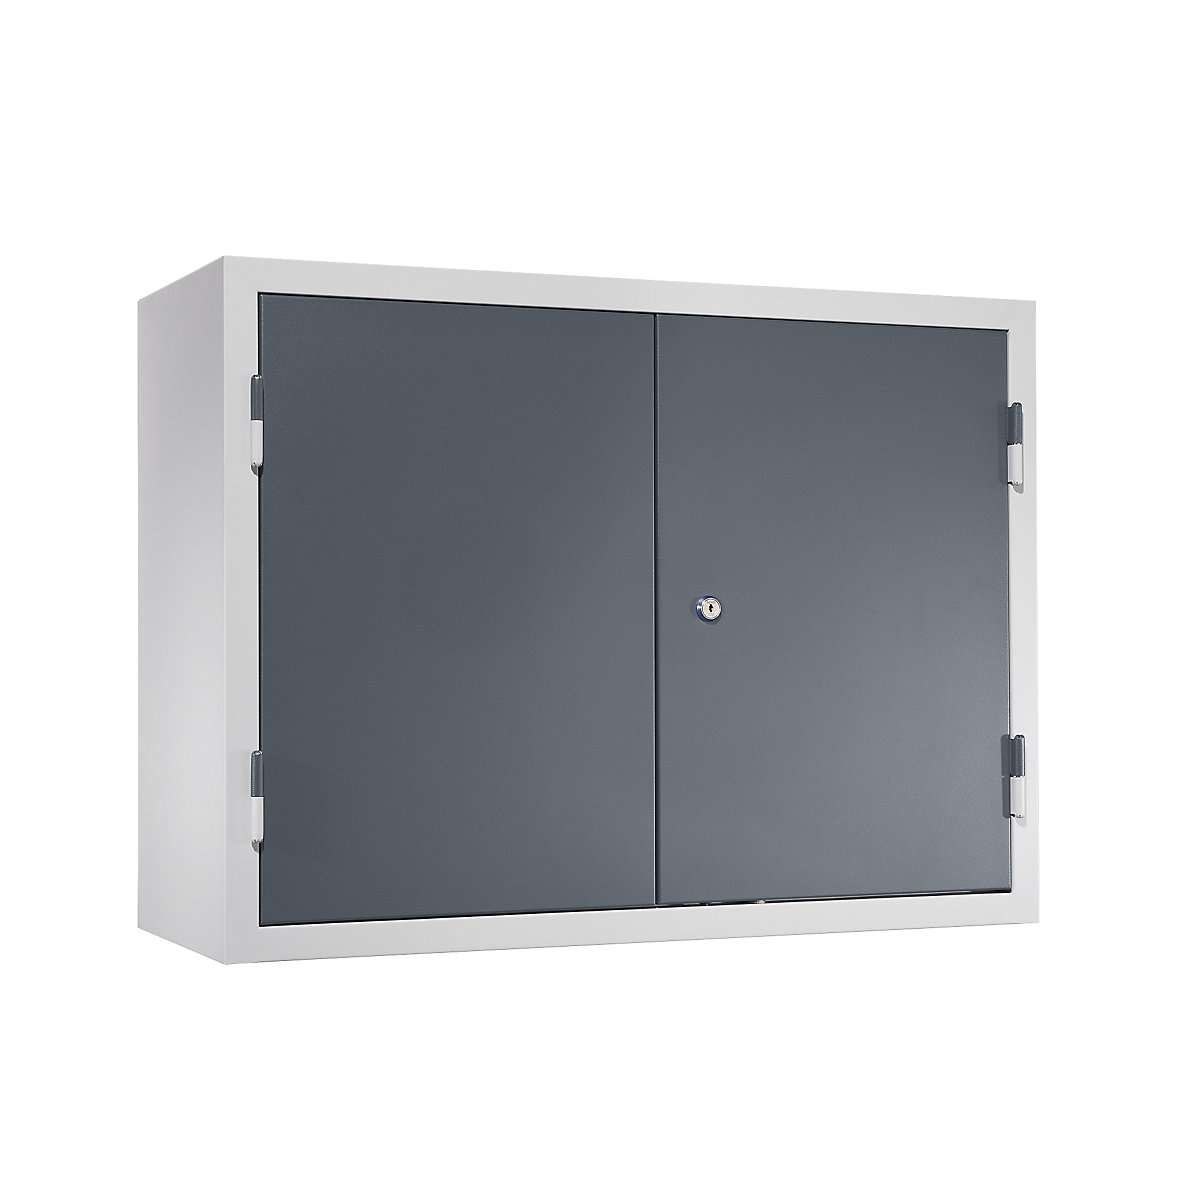 Wall mounted cupboard for the workshop – eurokraft basic, HxWxD 600 x 800 x 320 mm, solid panel doors, with 2 shelves + 2 drawers, basalt grey RAL 7012-6